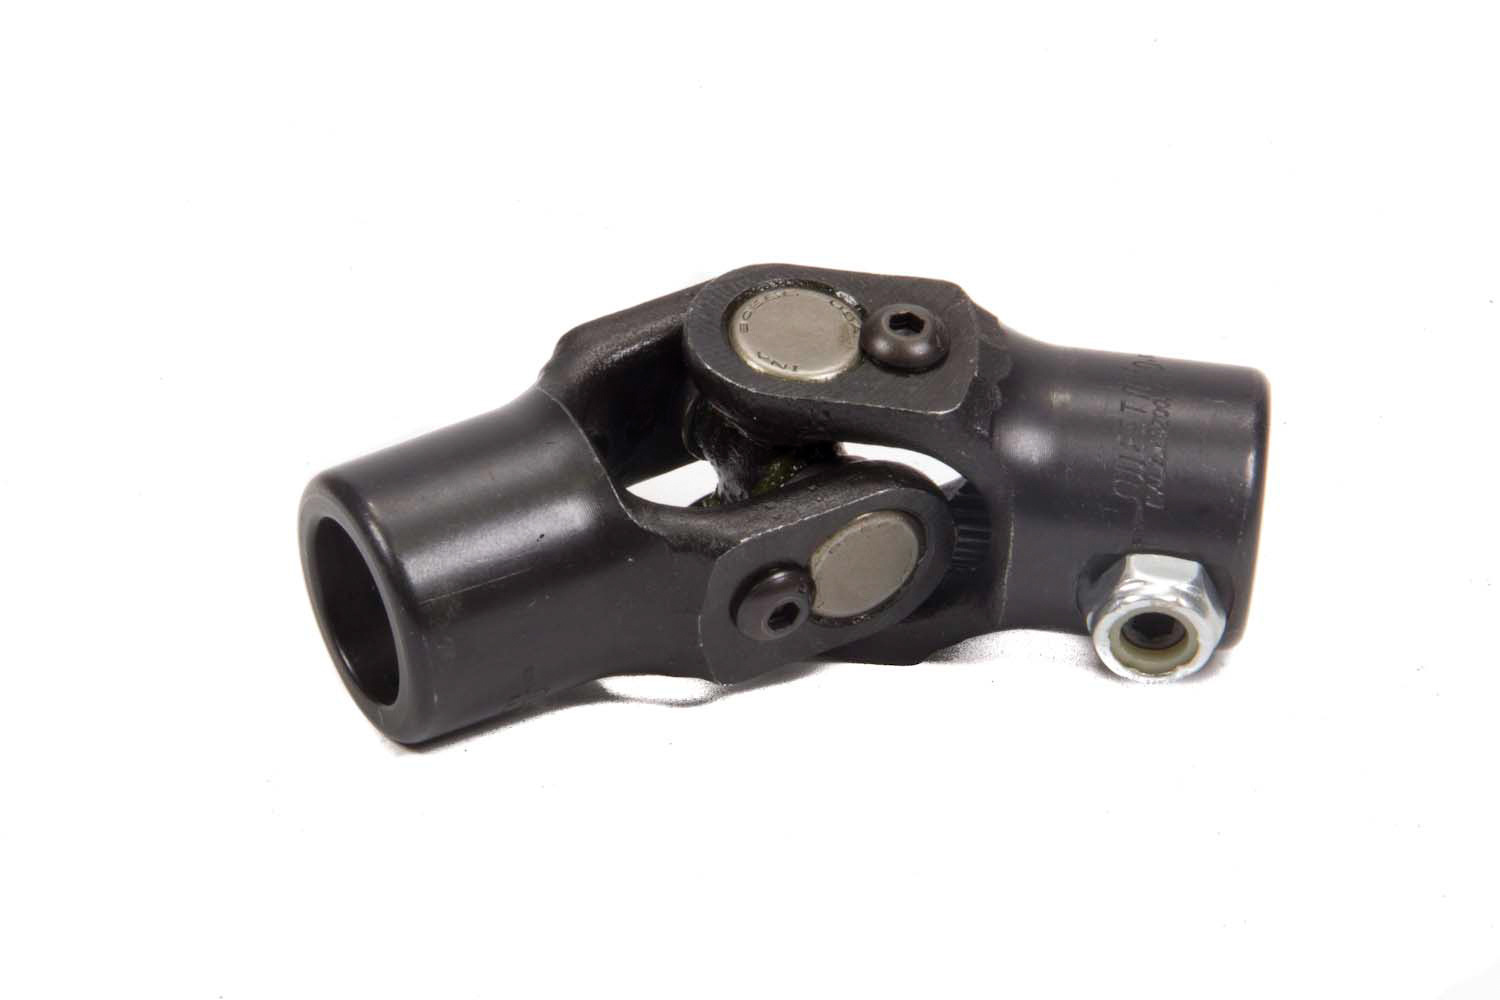 Sweet Manufacturing 401-50630 Steering Universal Joint, Single Joint, 3/4 in Smooth Bore to 5/8 in 36 Spline, Steel, Black Paint, Each